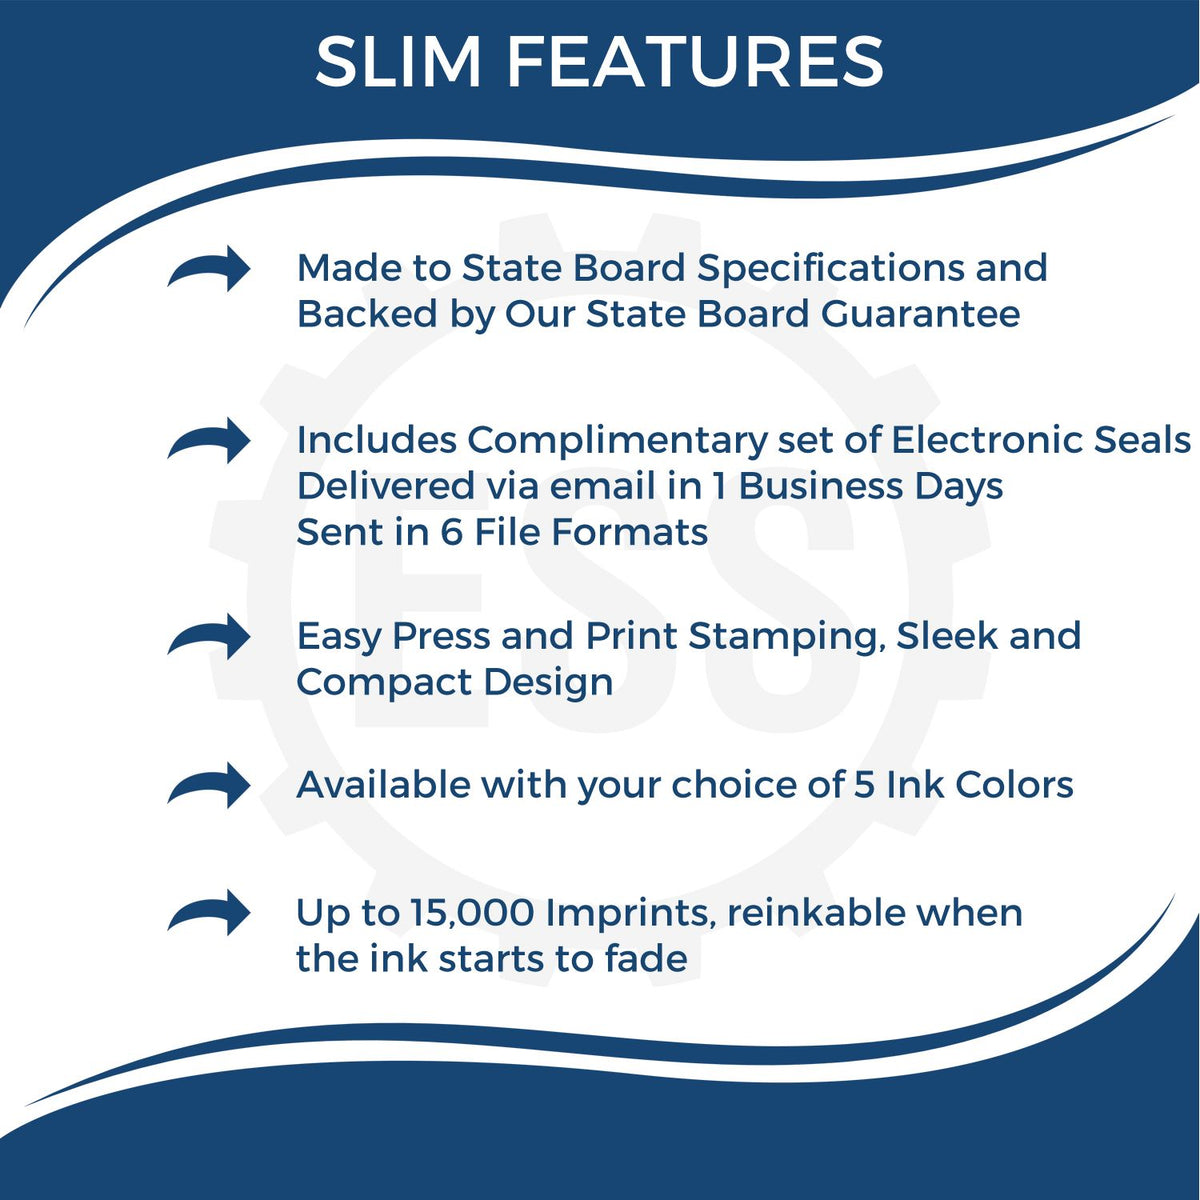 A picture of an infographic highlighting the selling points for the Super Slim Florida Notary Public Stamp